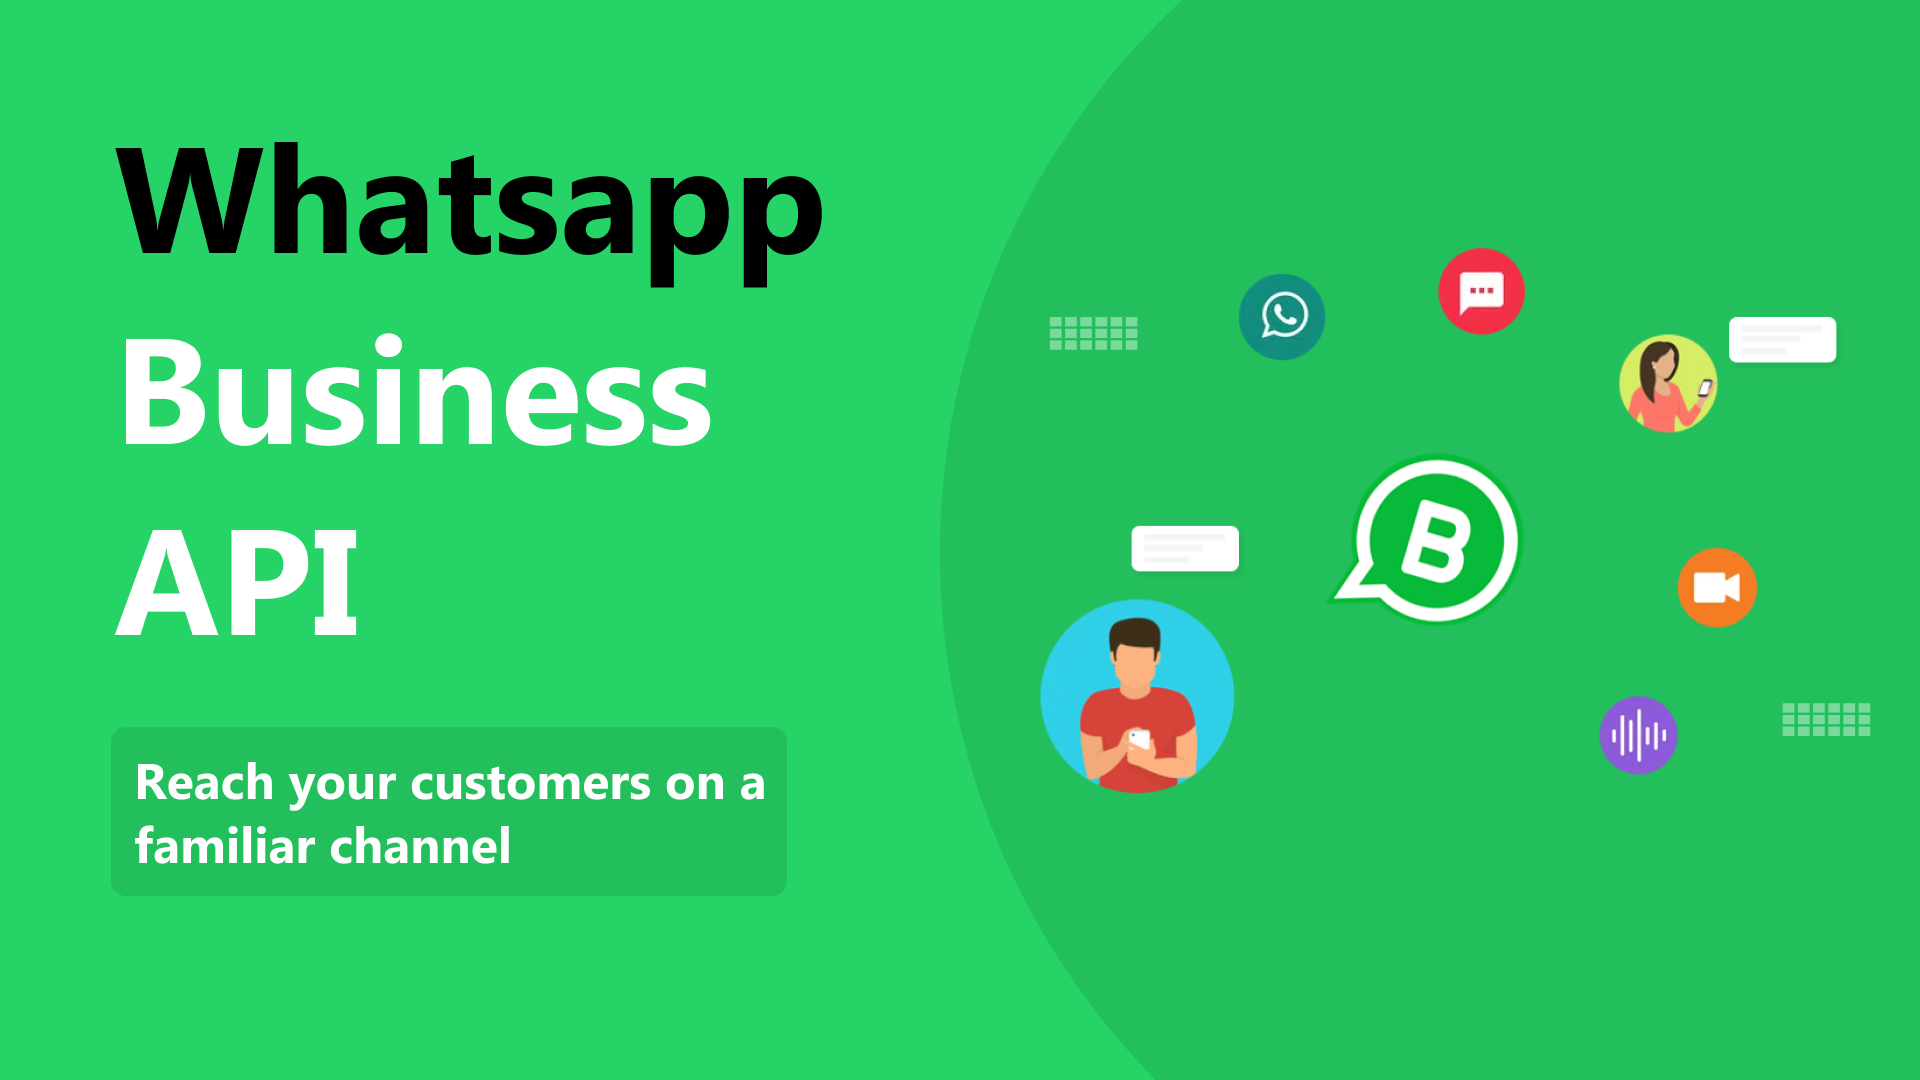 What is the Limit of WhatsApp for Business API?